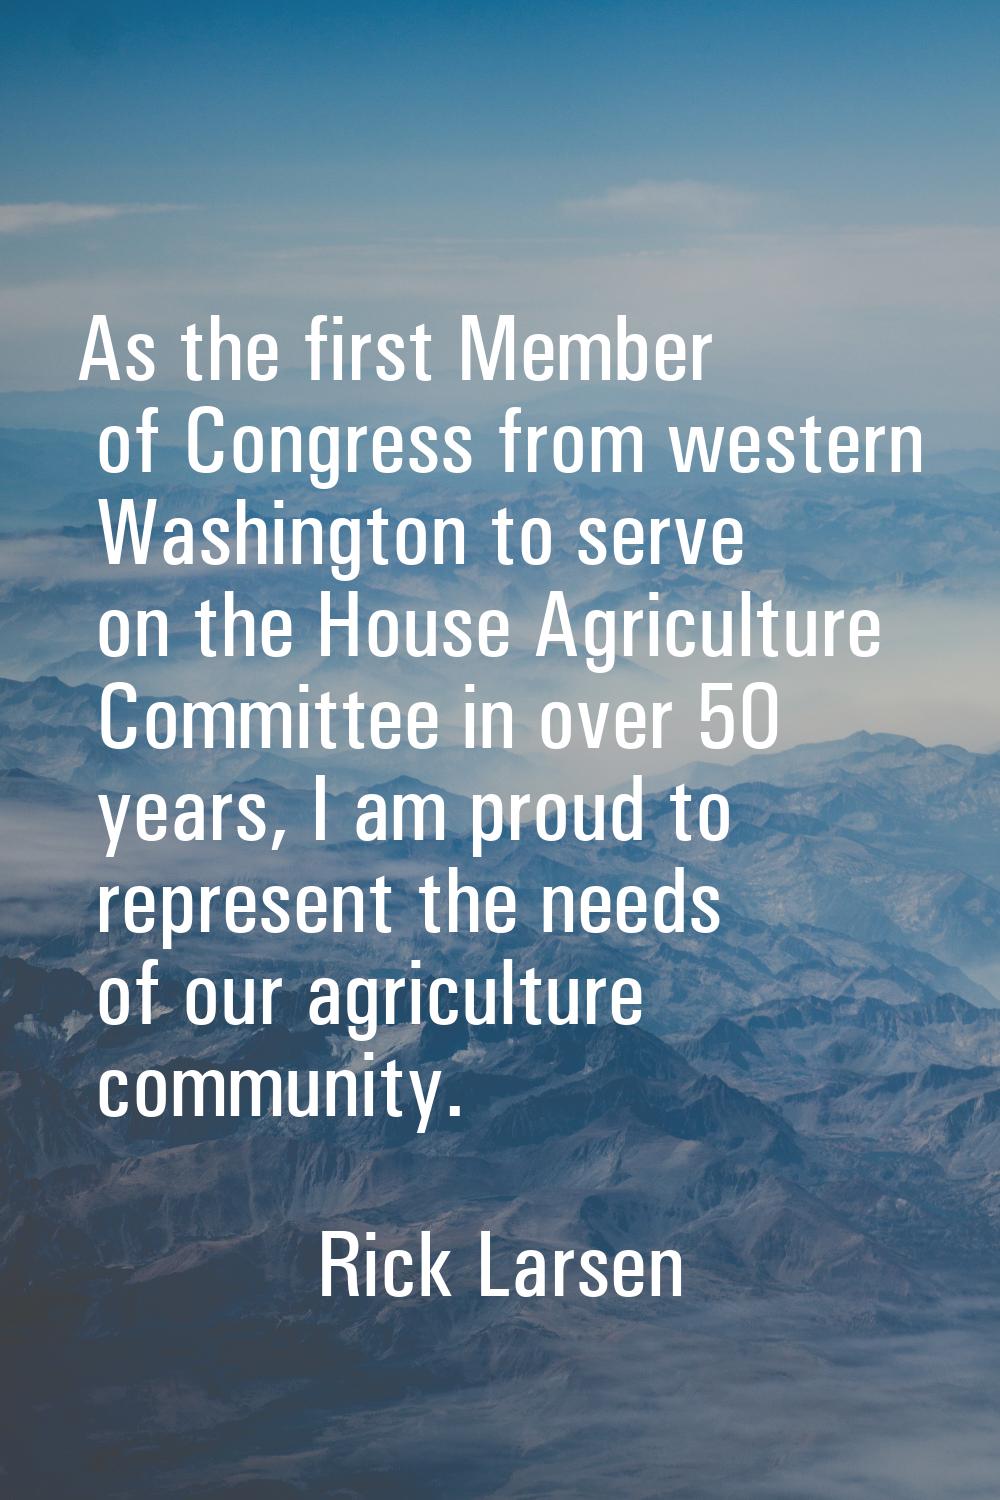 As the first Member of Congress from western Washington to serve on the House Agriculture Committee